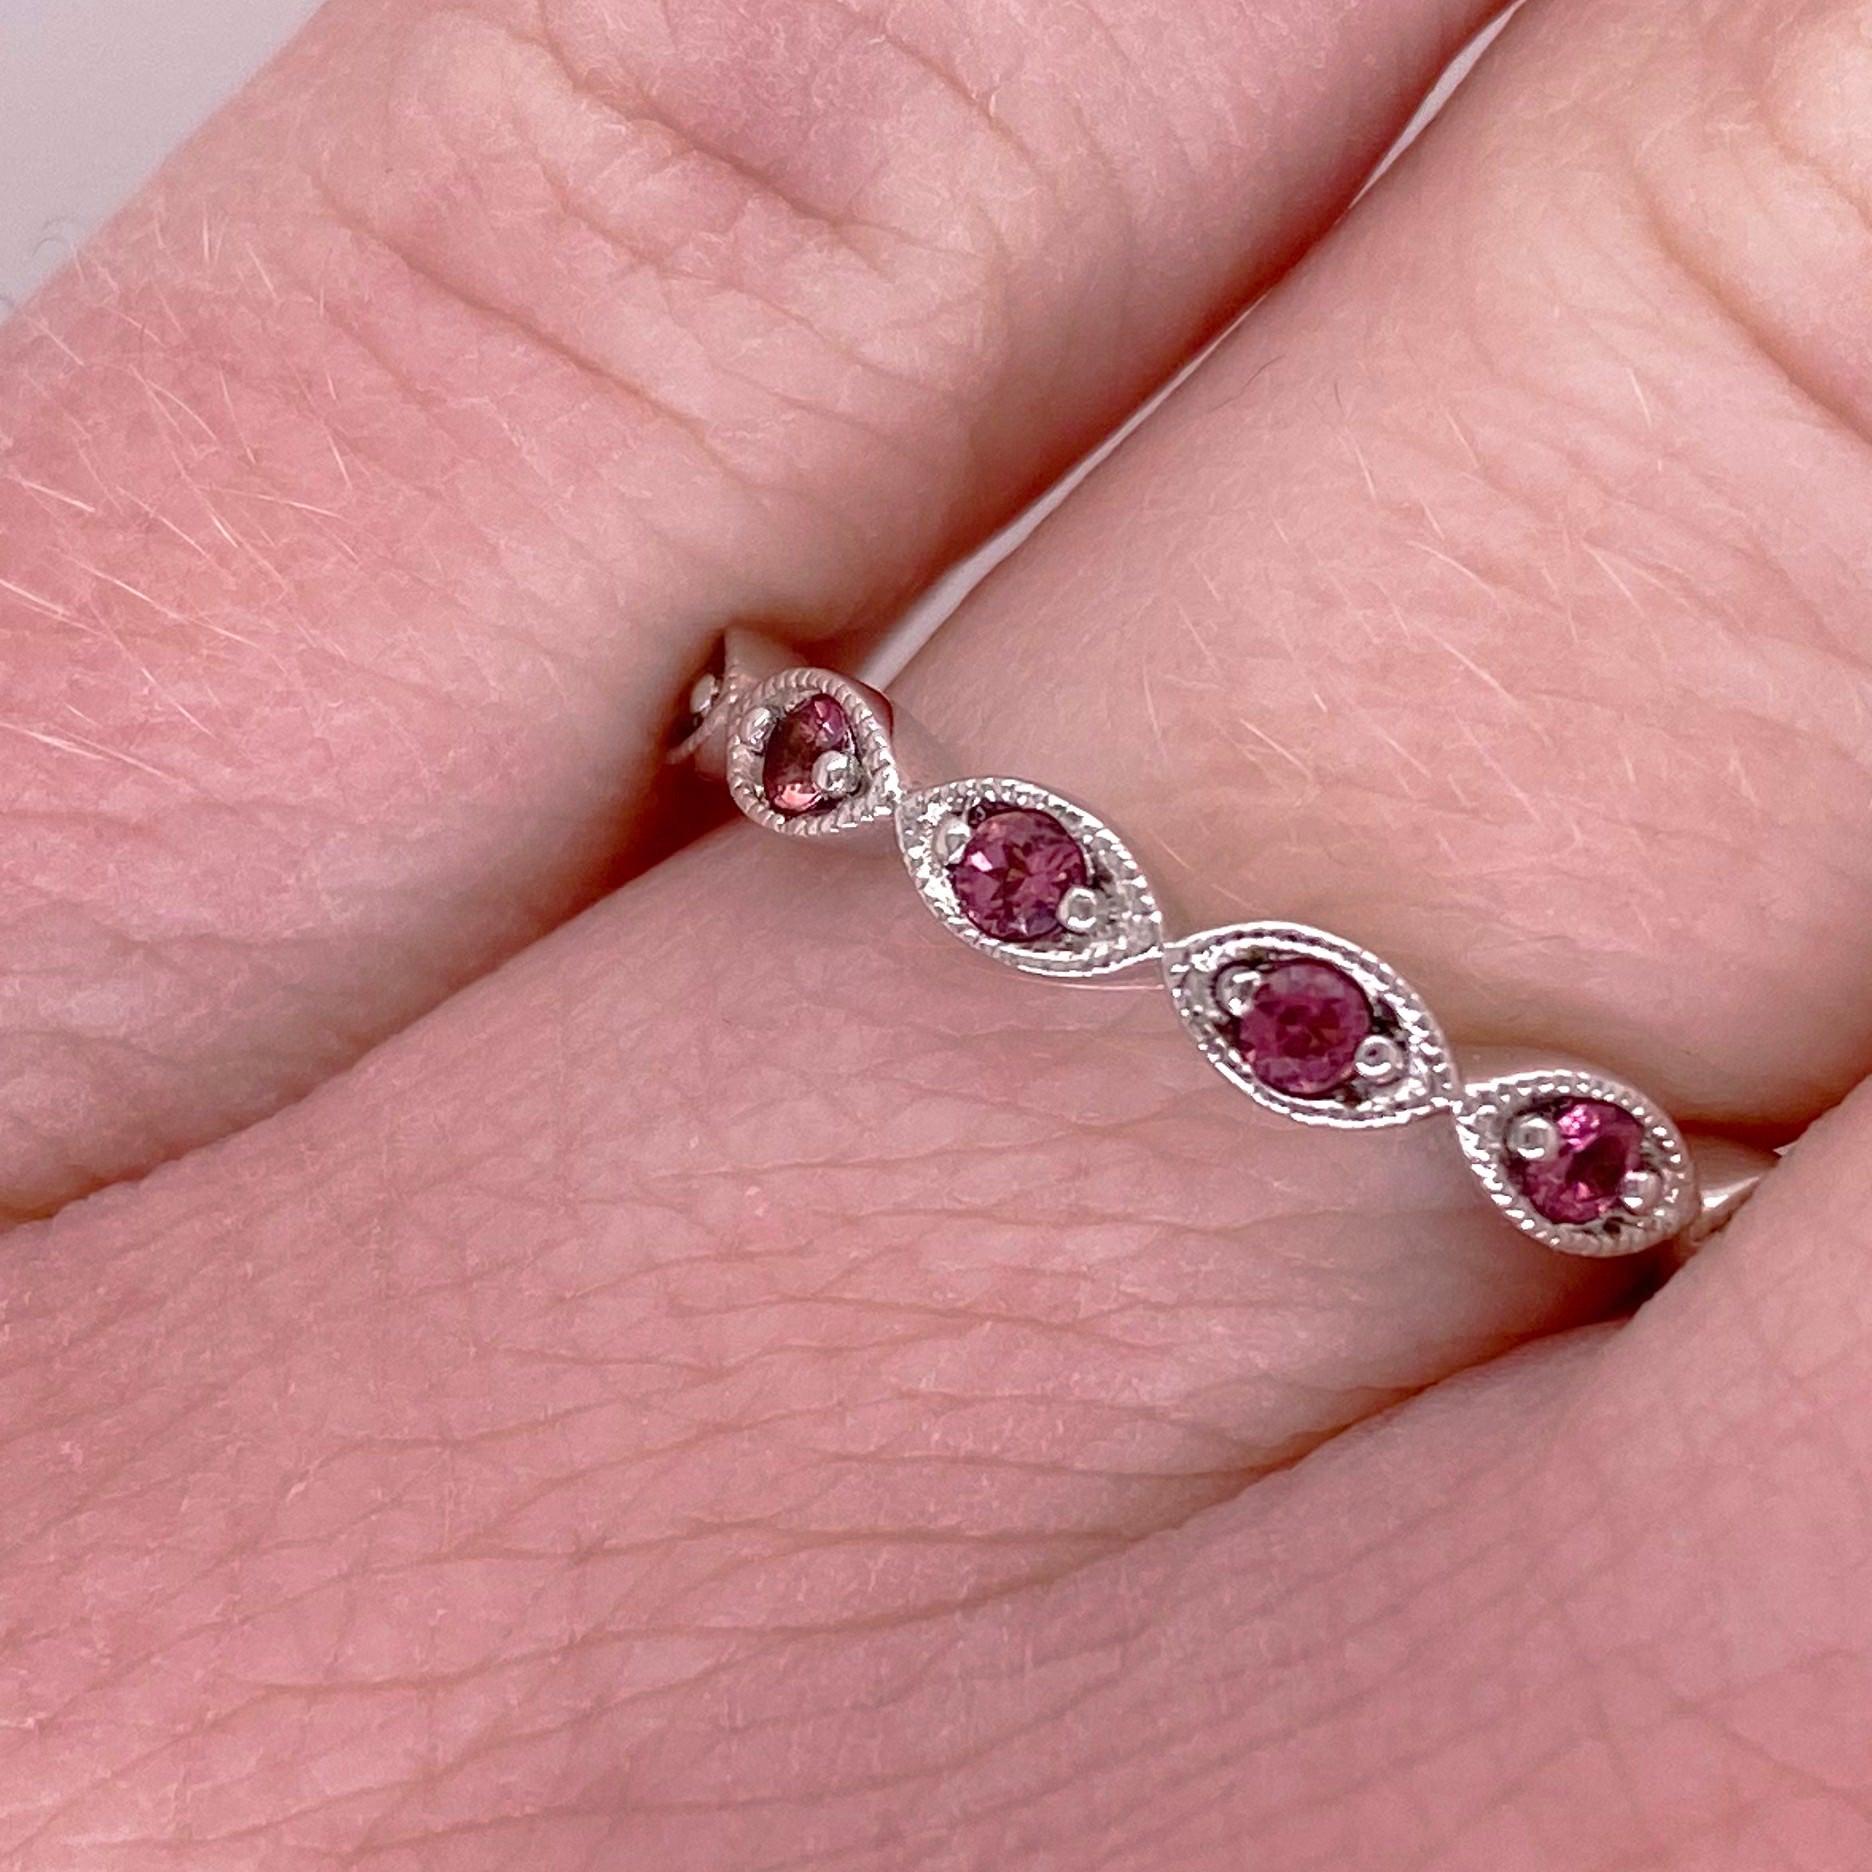 For Sale:  Pink Tourmaline Ring, Eternity Band, White Gold, Stackable, Pink Wedding Band 2